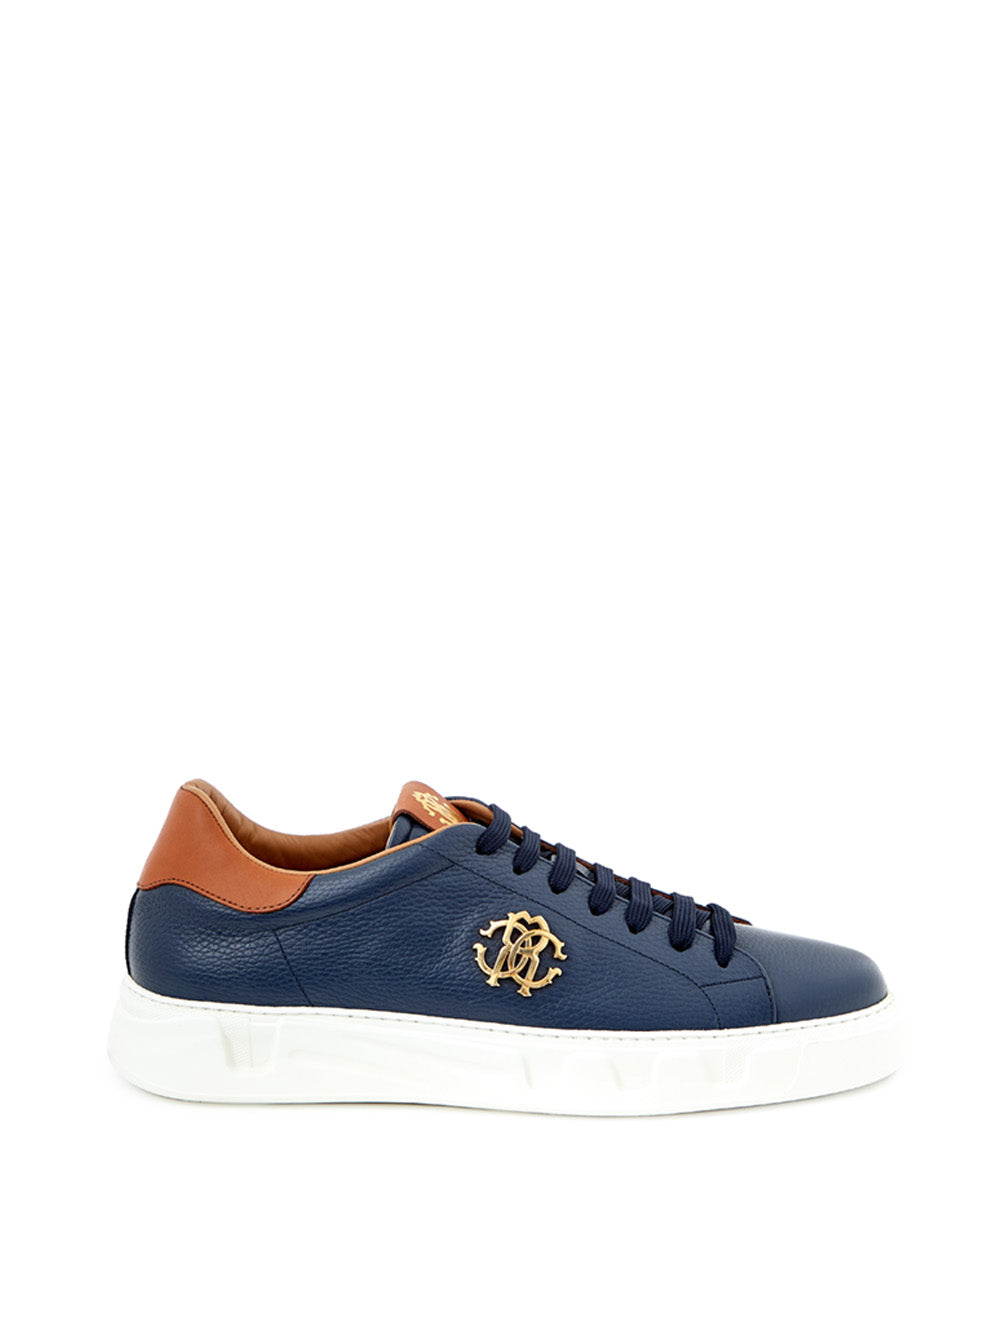 Elegant Blue Leather Sneakers with Gold Accents